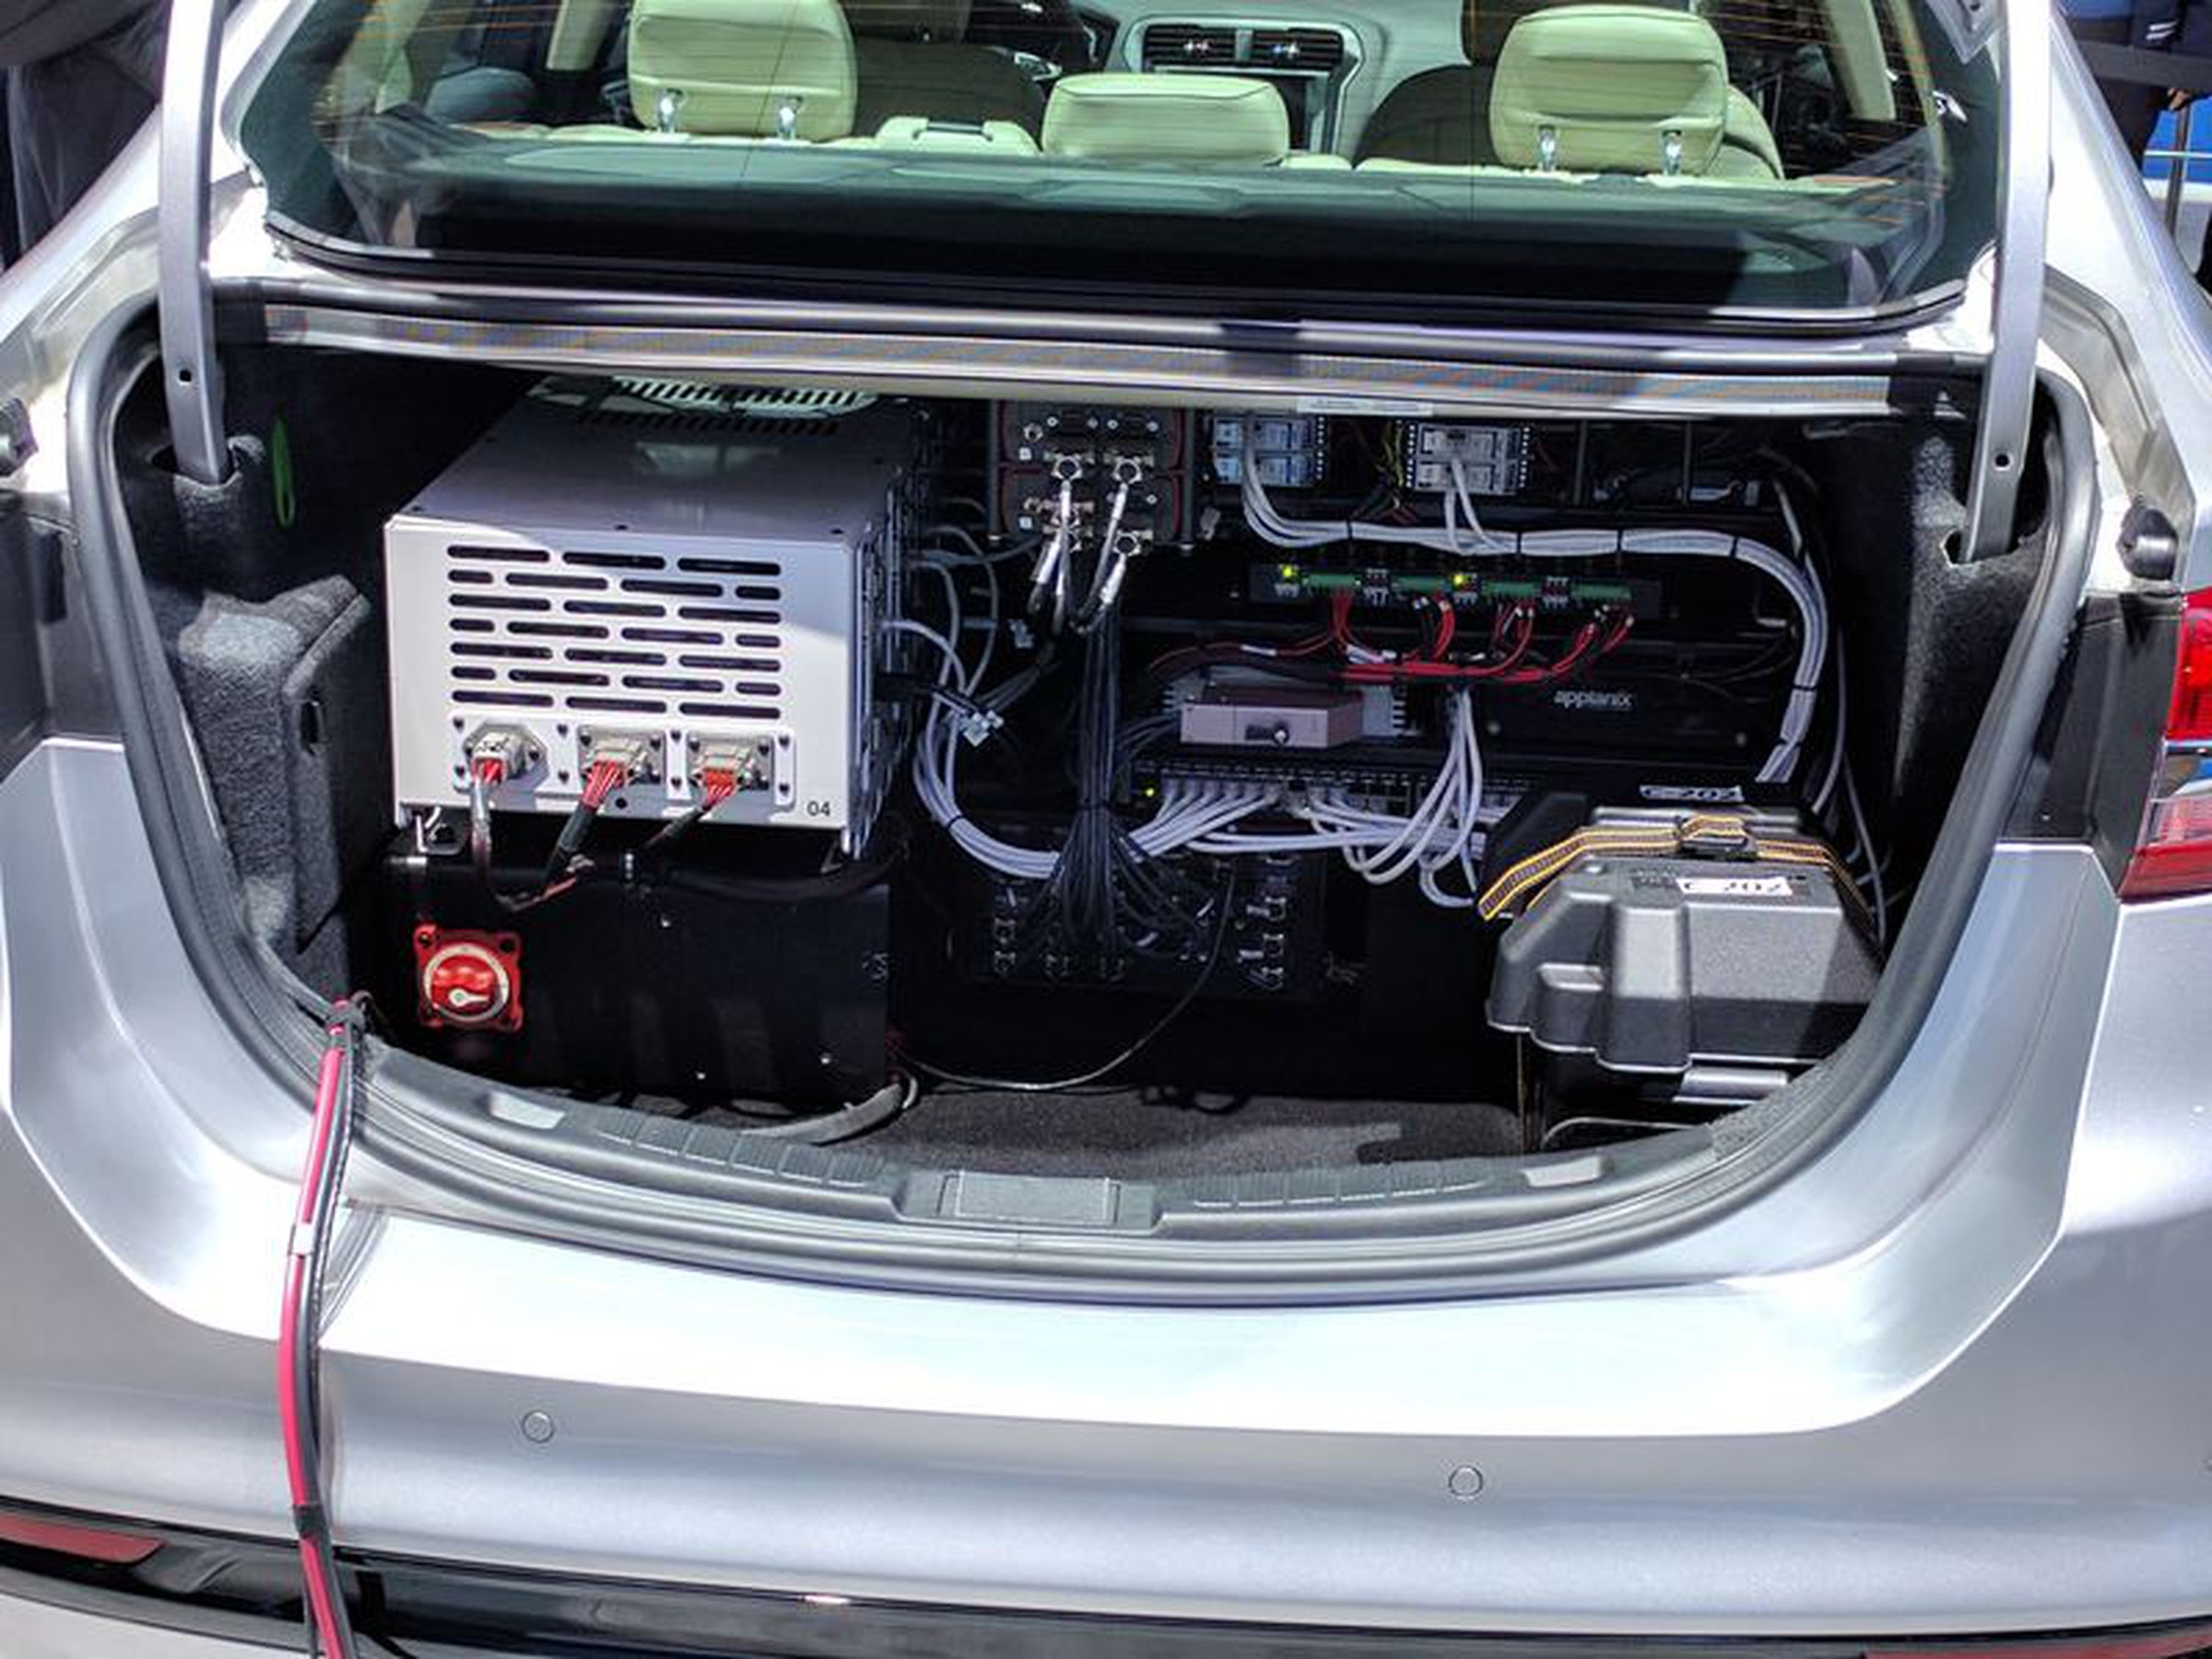 The trunk of a self-driving Ford Fusion